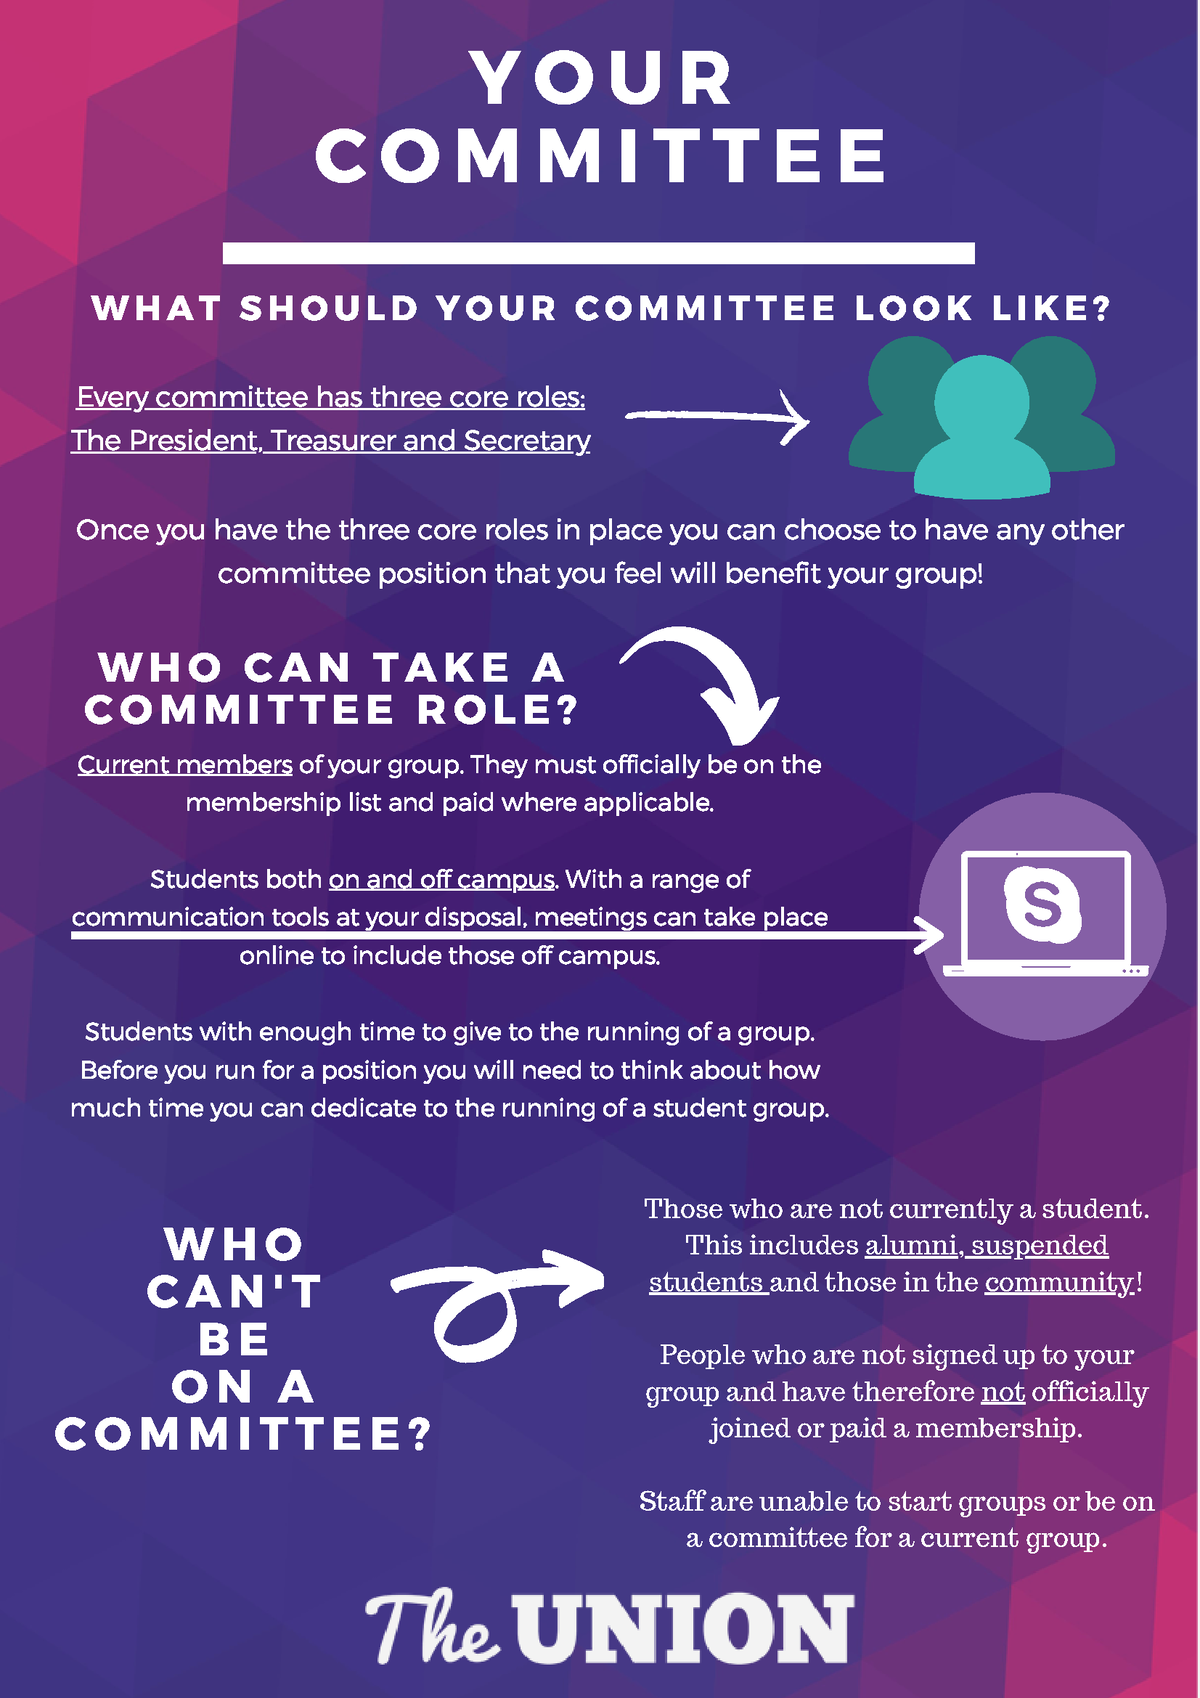 committee-infographic-final-y-o-u-r-c-o-m-m-i-t-t-e-e-current-members